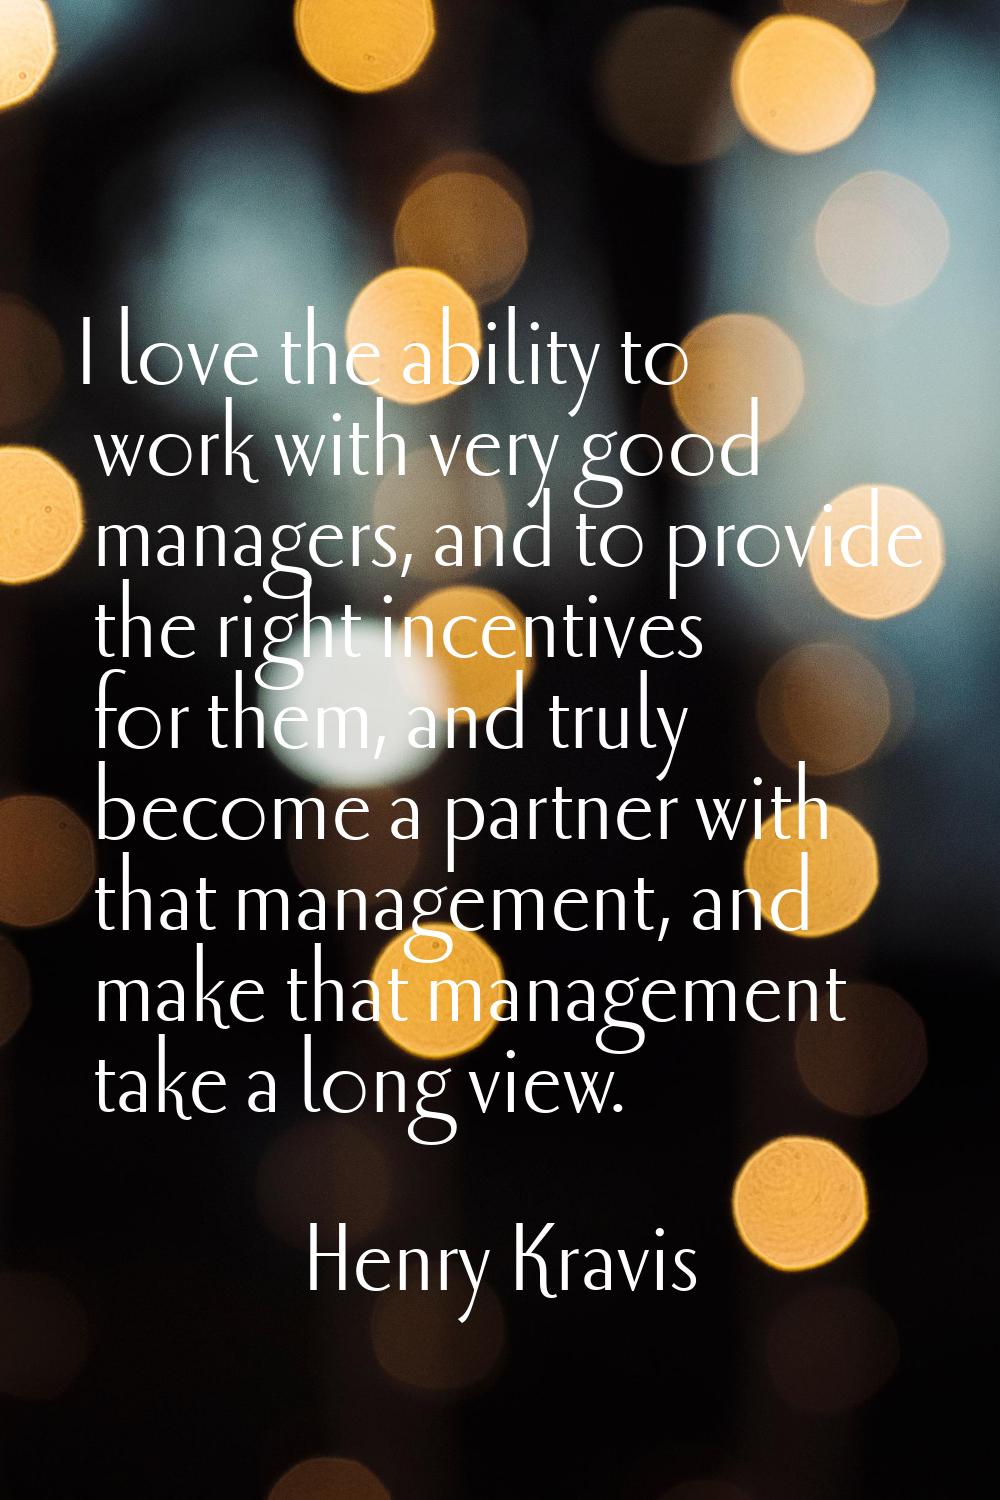 I love the ability to work with very good managers, and to provide the right incentives for them, a